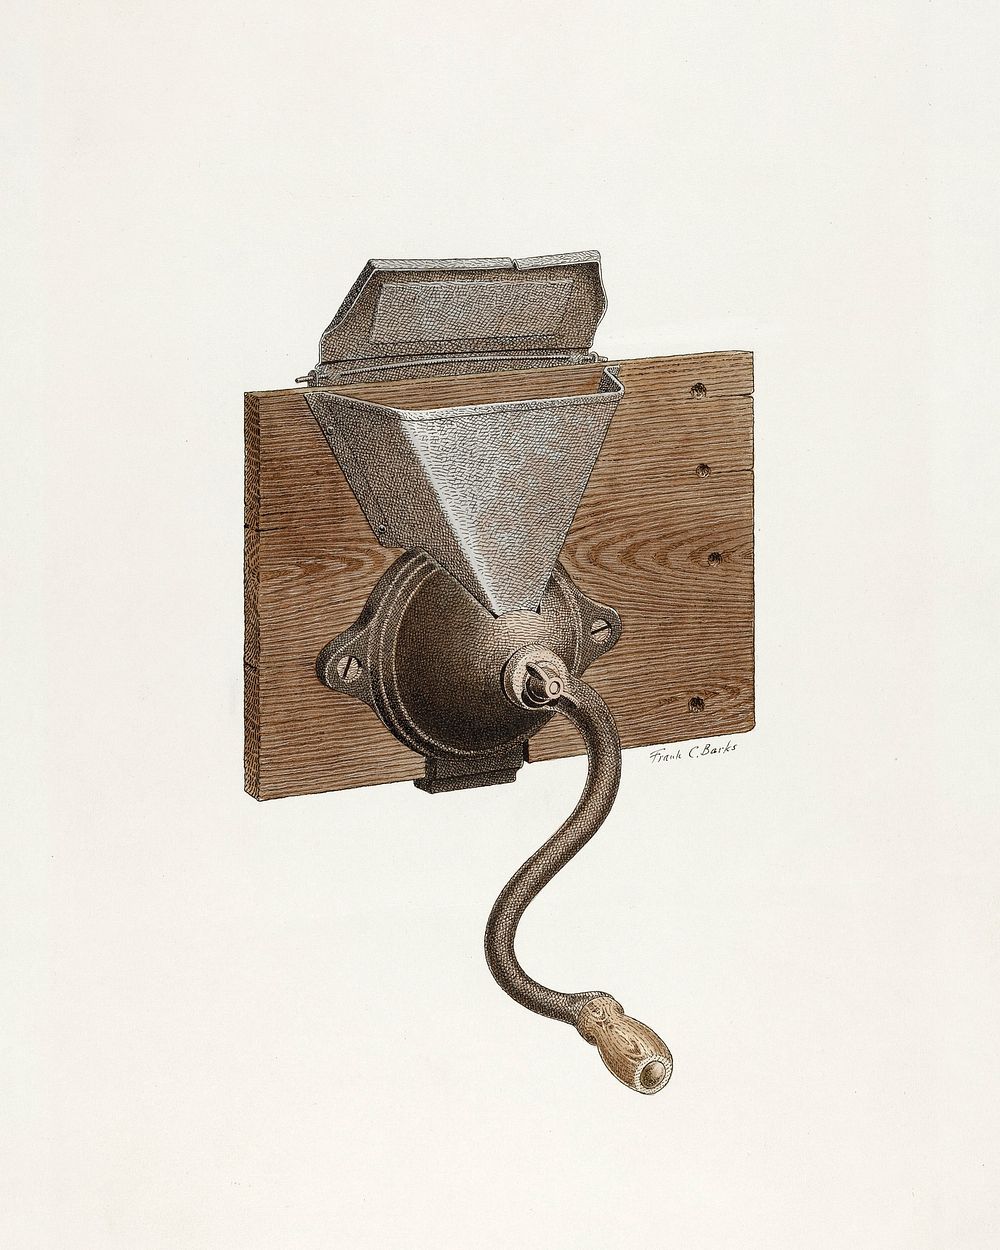 Coffee Mill (1935&ndash;1942) by Frank C. Barks. Original from The National Gallery of Art. Digitally enhanced by rawpixel.